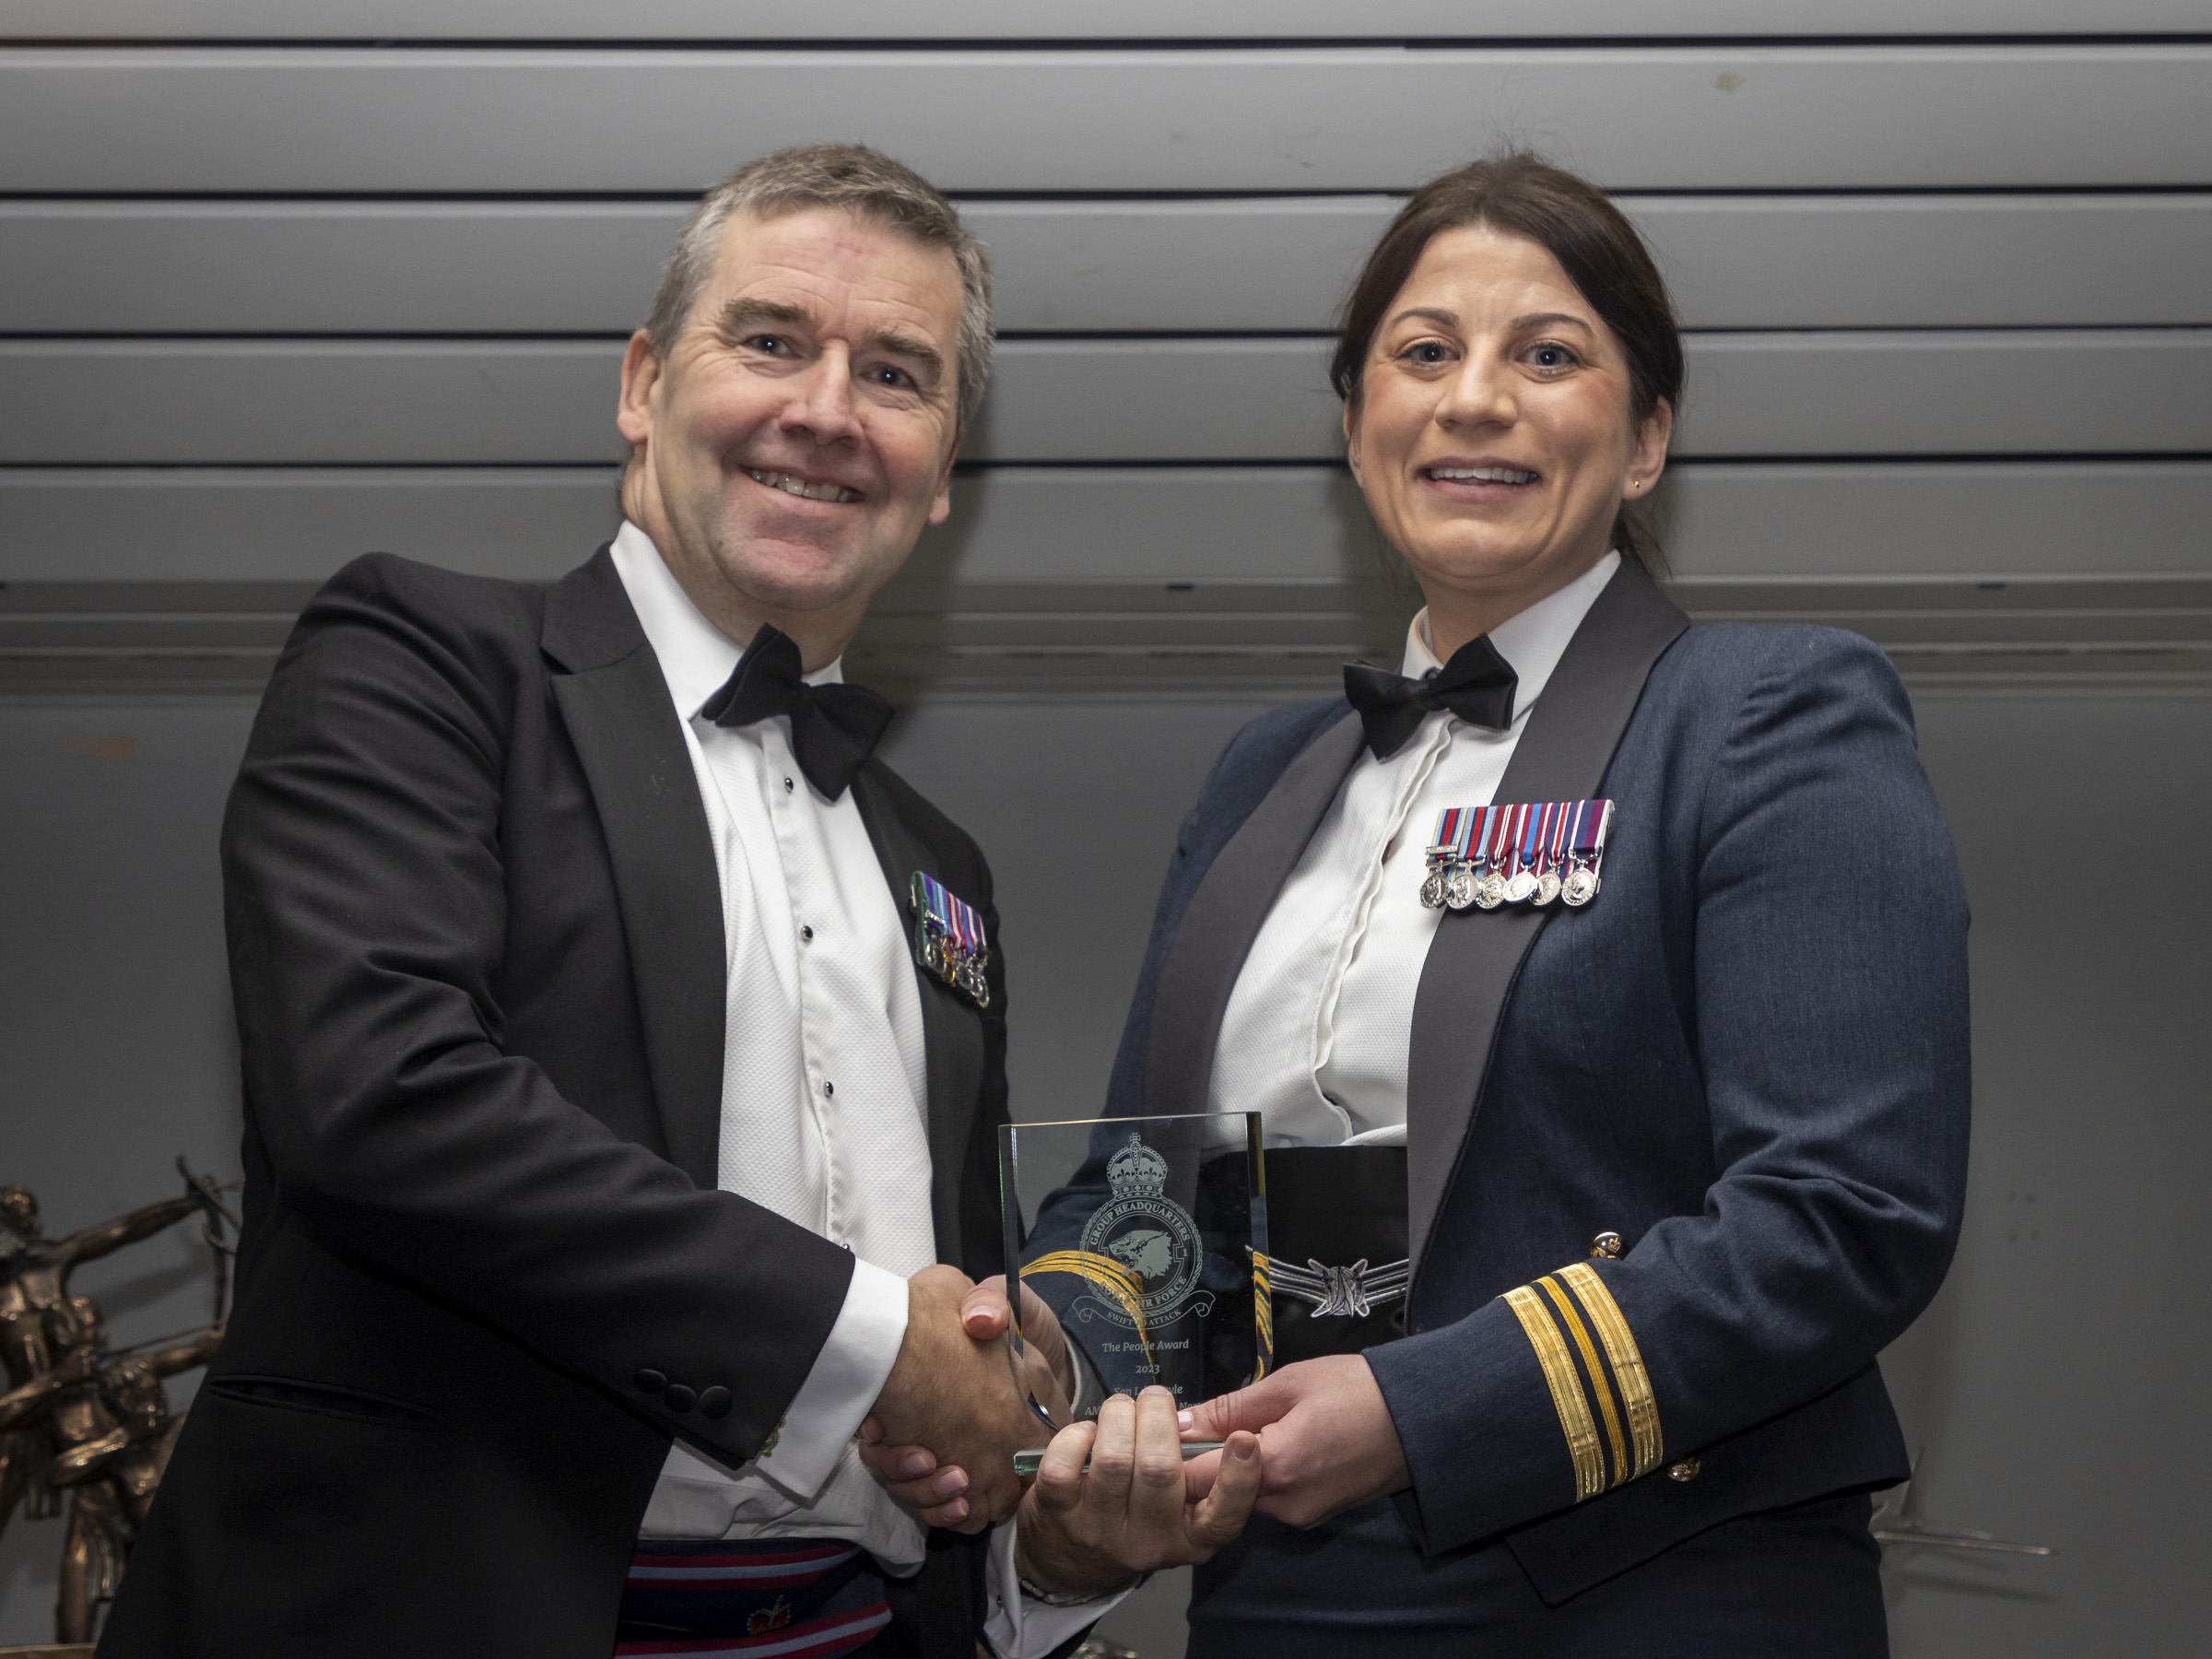 Squadron Leader Lucy Playle winner of The People Award